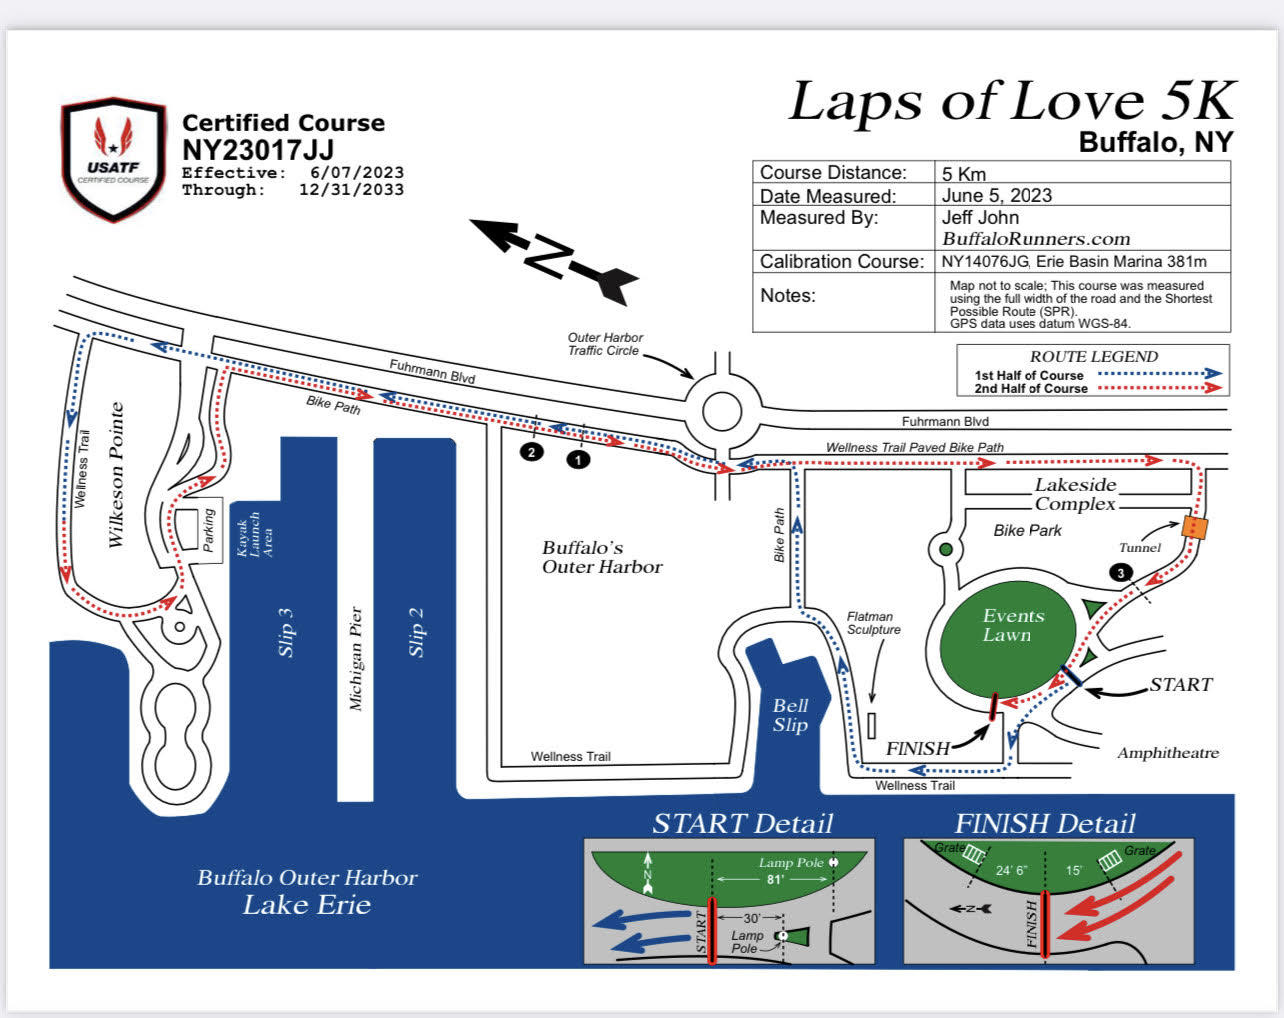 Laps of Love in Buffalo, NY - Details, Registration, and Results